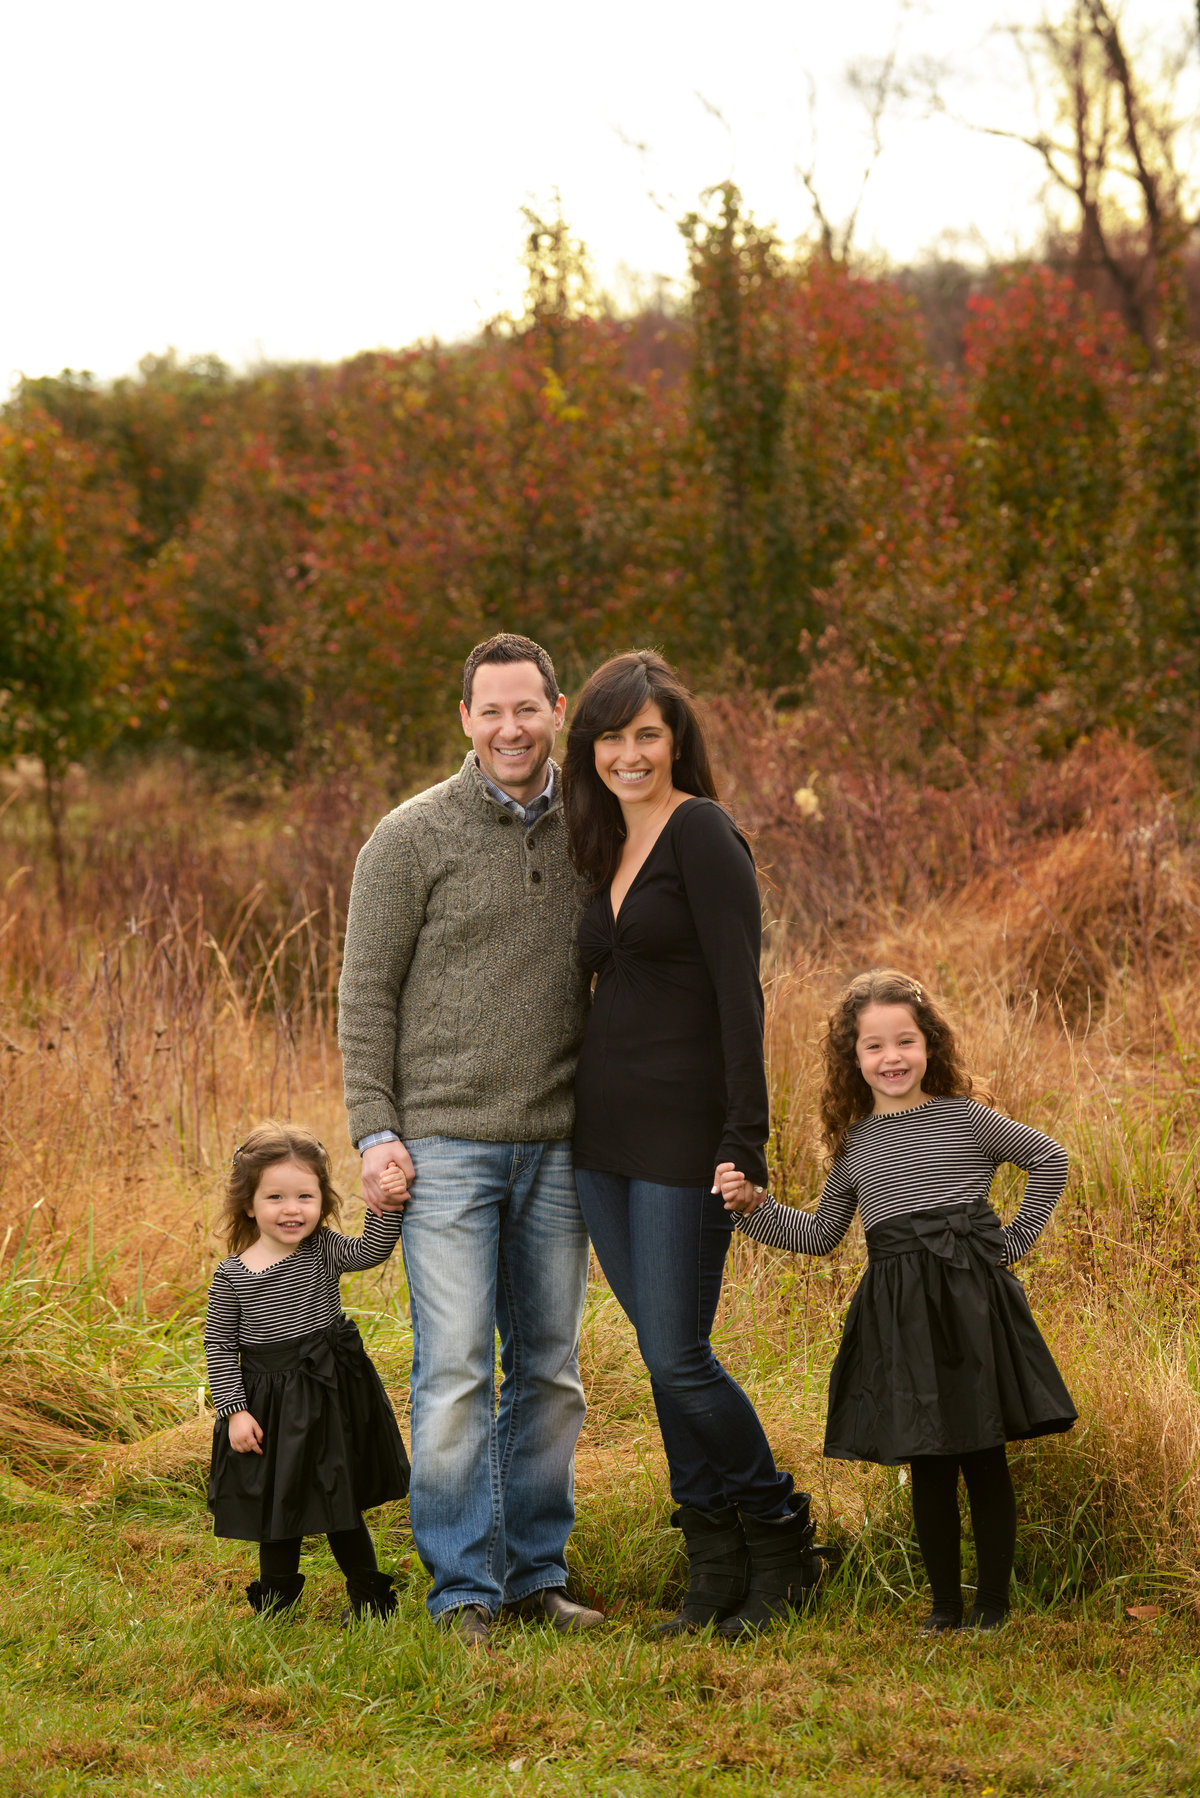 We specialize in family photography near Annapolis